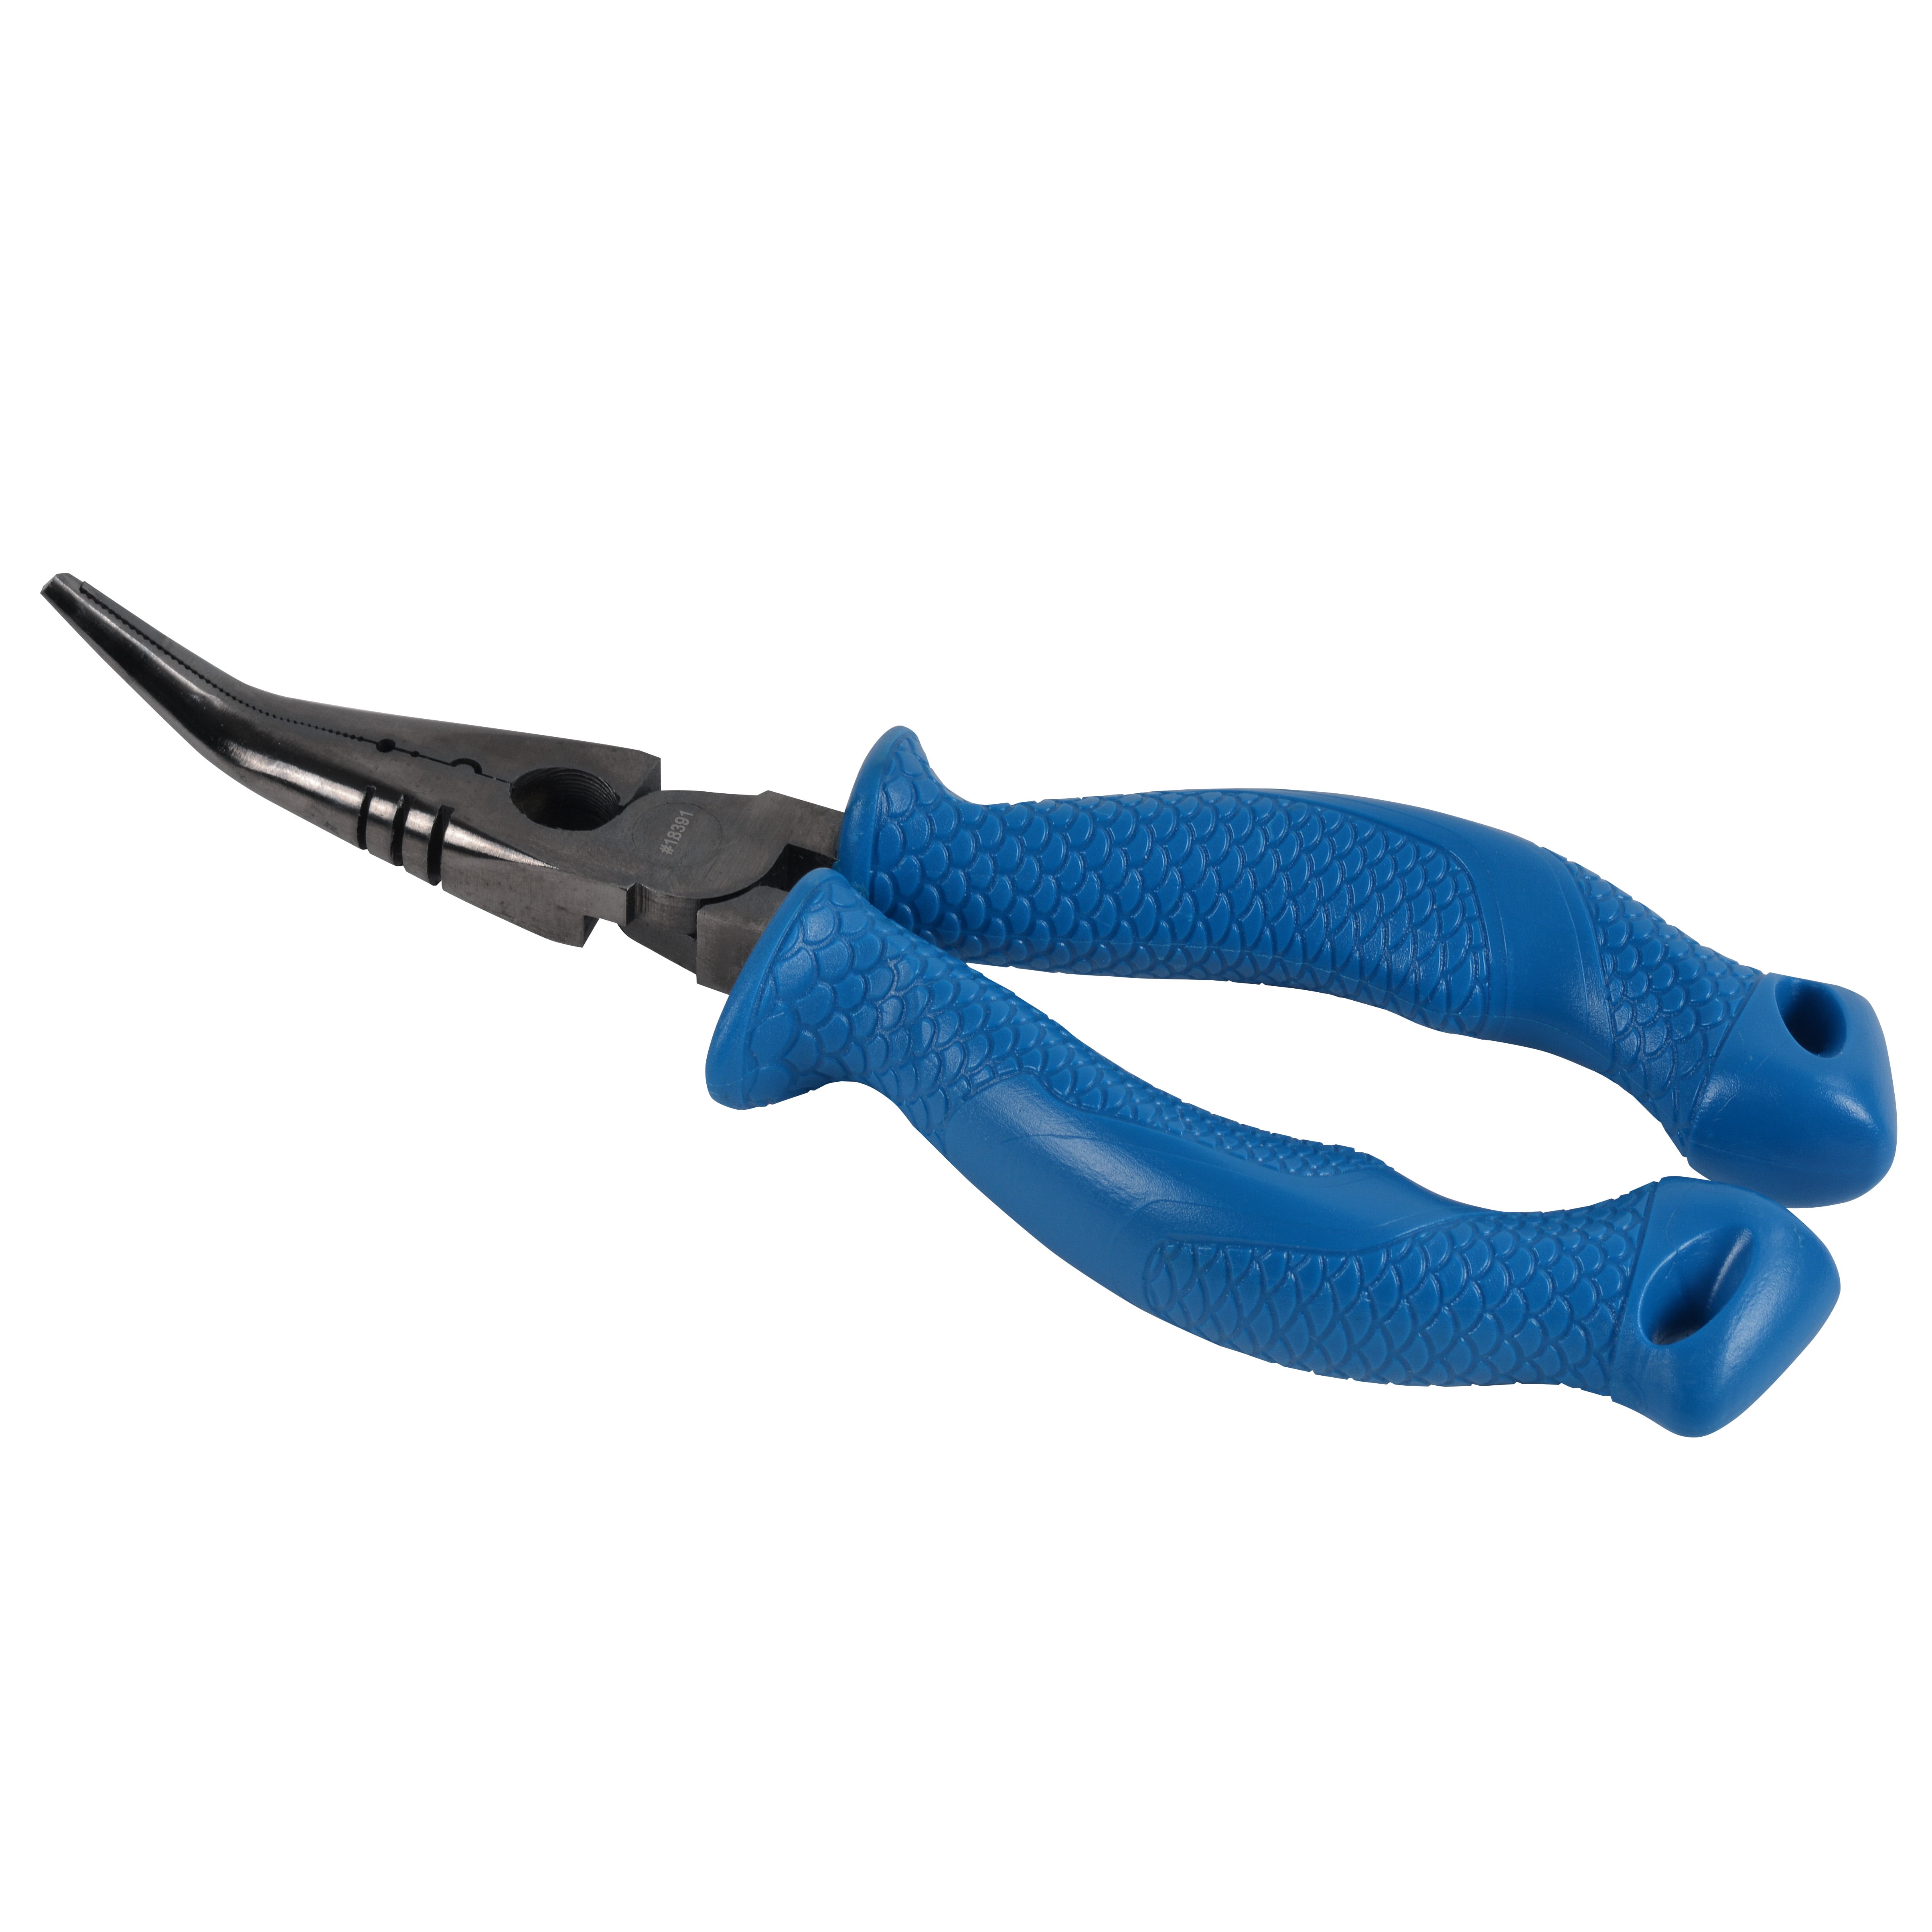  Calamus Fishing Pliers, Lightweight Aluminum Fishing Tools with  Vanadium Cutters and Rubber Handles, Ultimate Saltwater Resistant Fishing  Gear, Split Ring Nose Plier, Blue : Sports & Outdoors